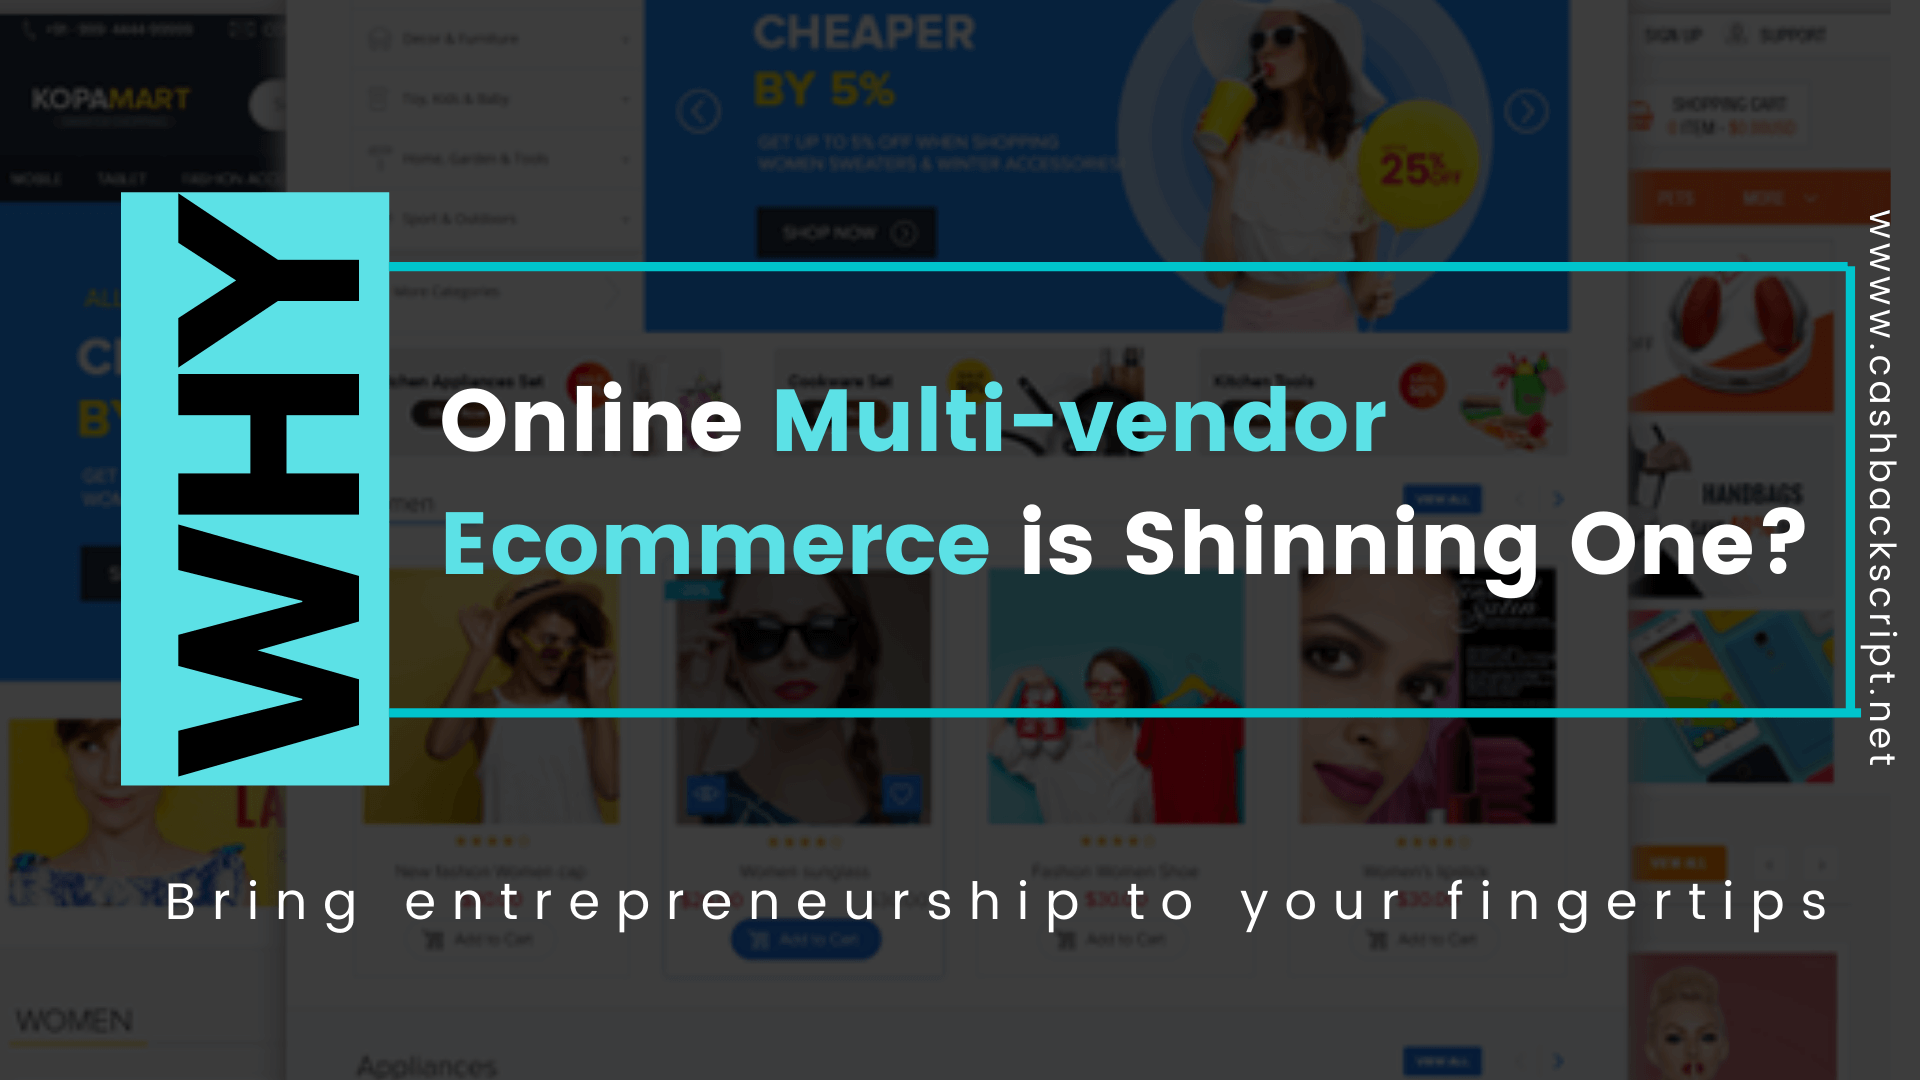 Why Online Multi-vendor Ecommerce is Shinning One?